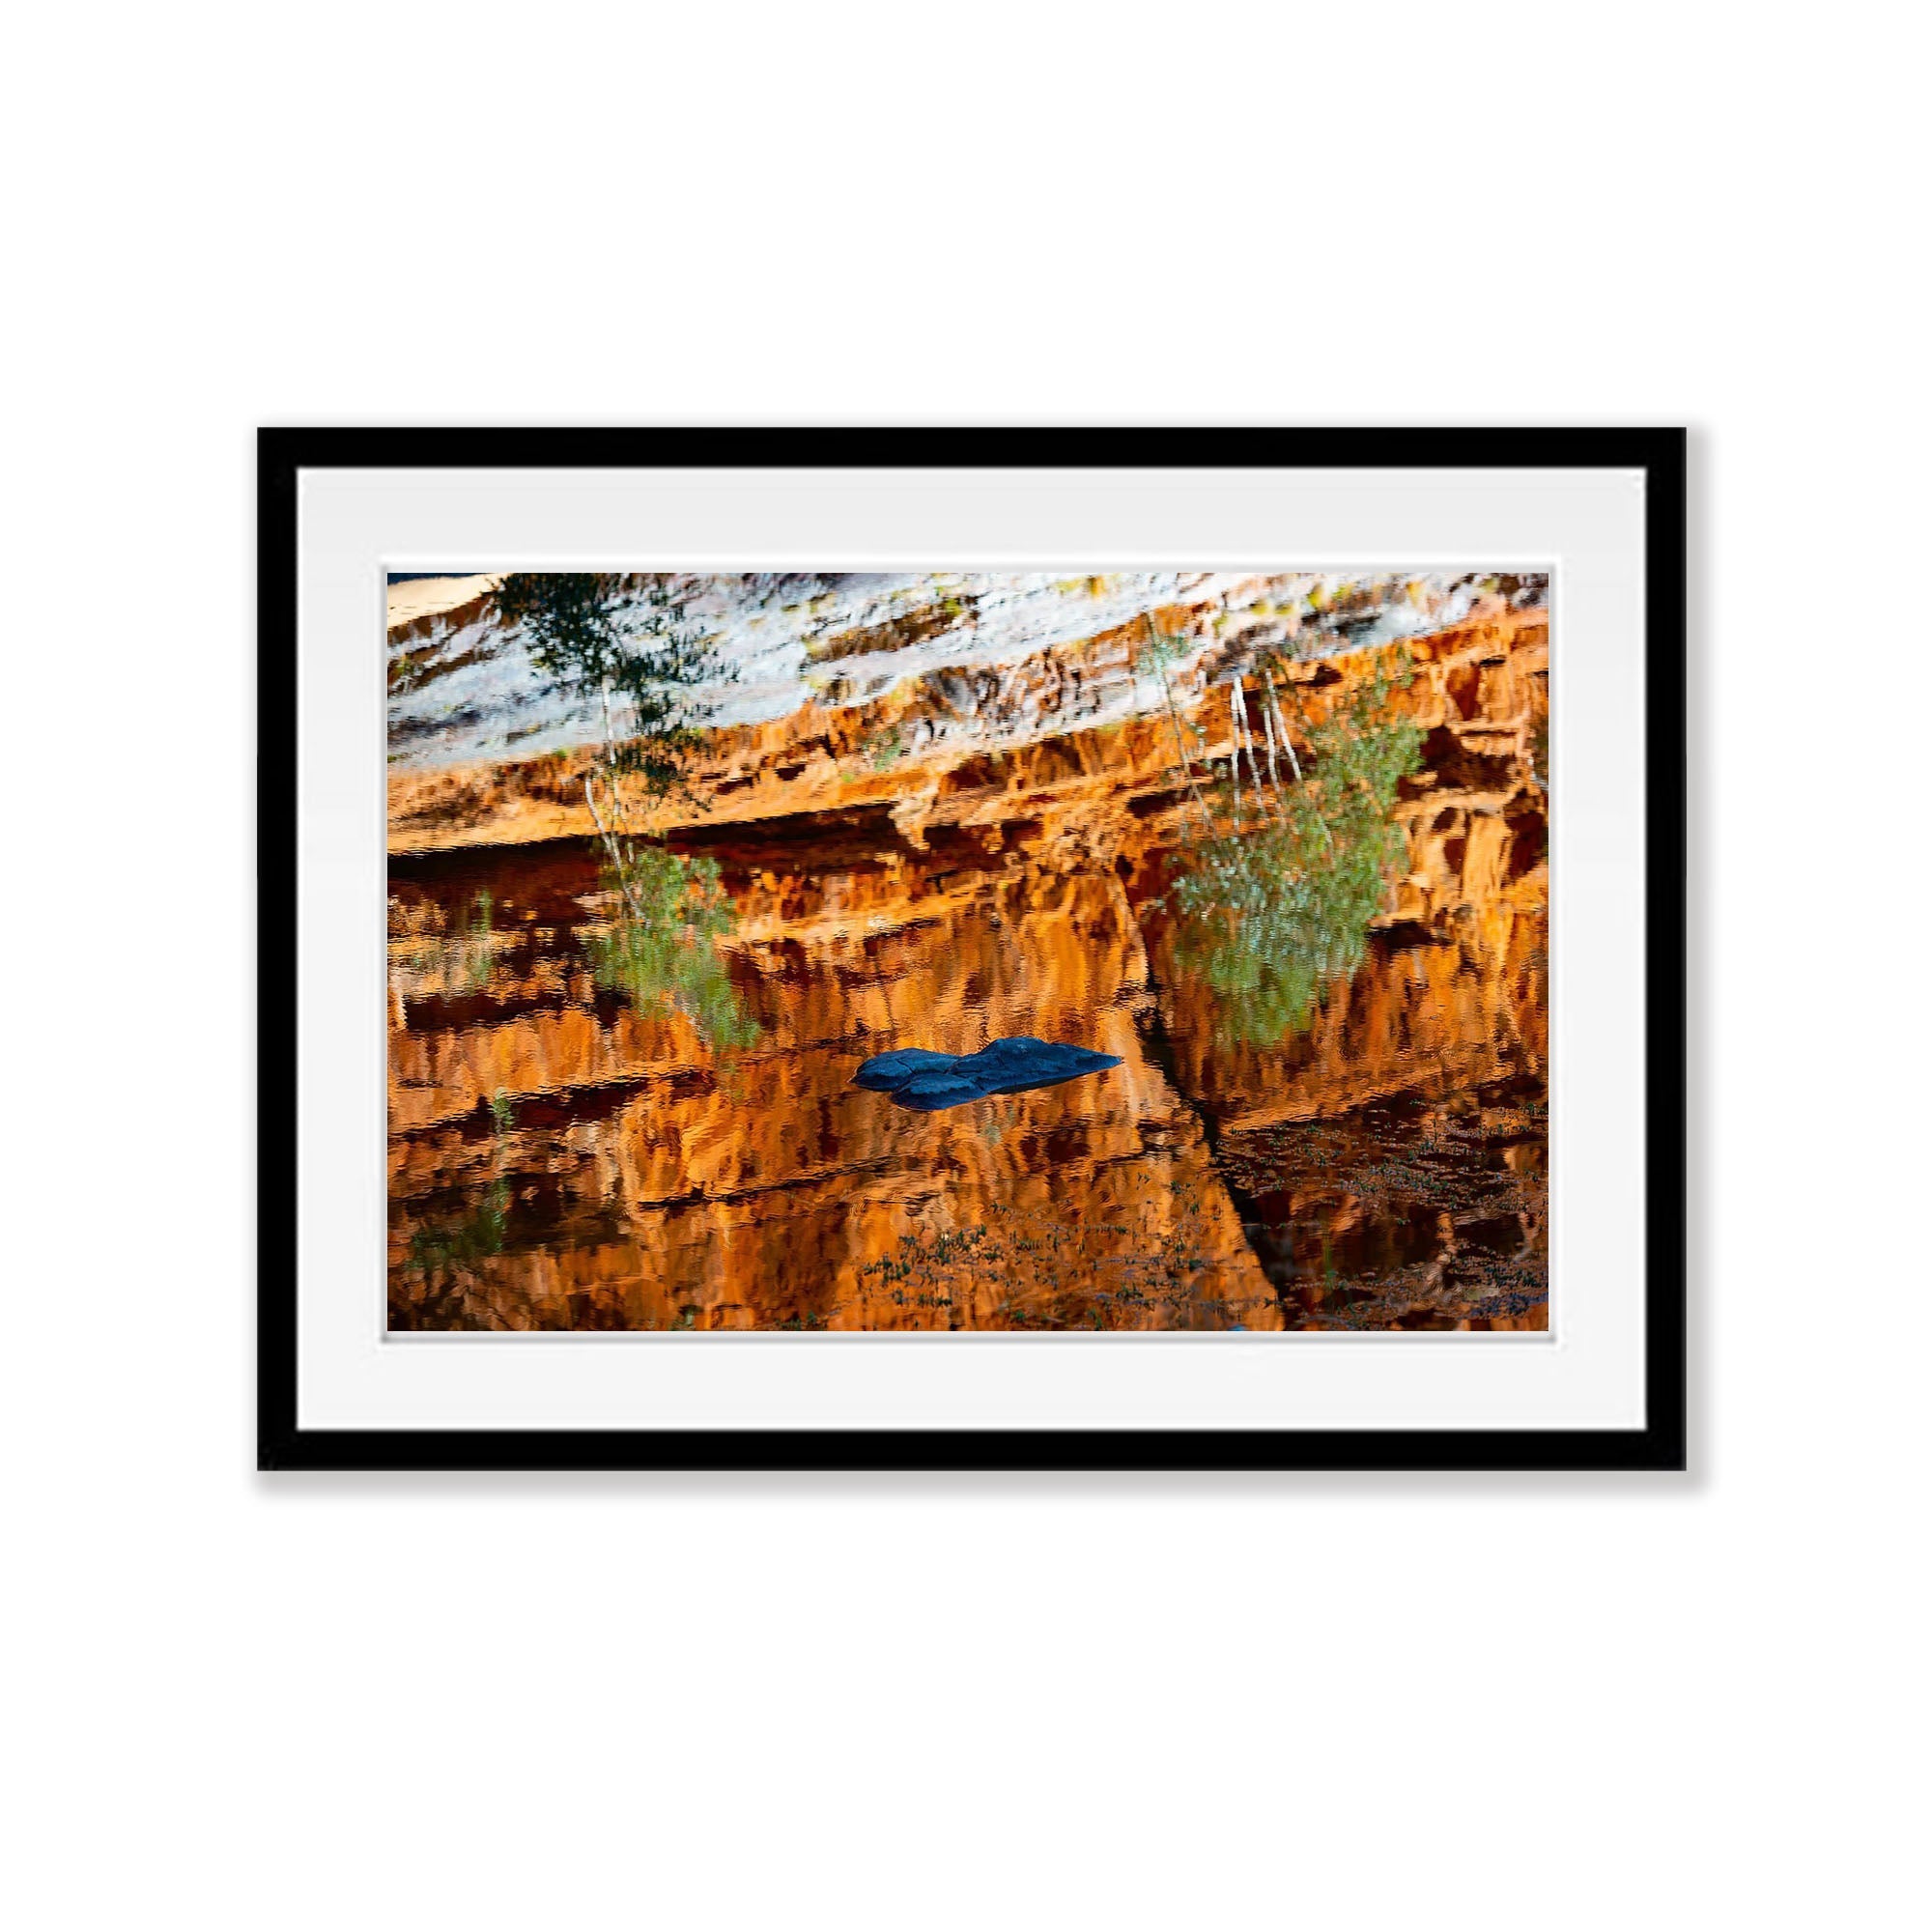 Ormiston Gorge Reflections, West MacDonnell Ranges - Northern Territory